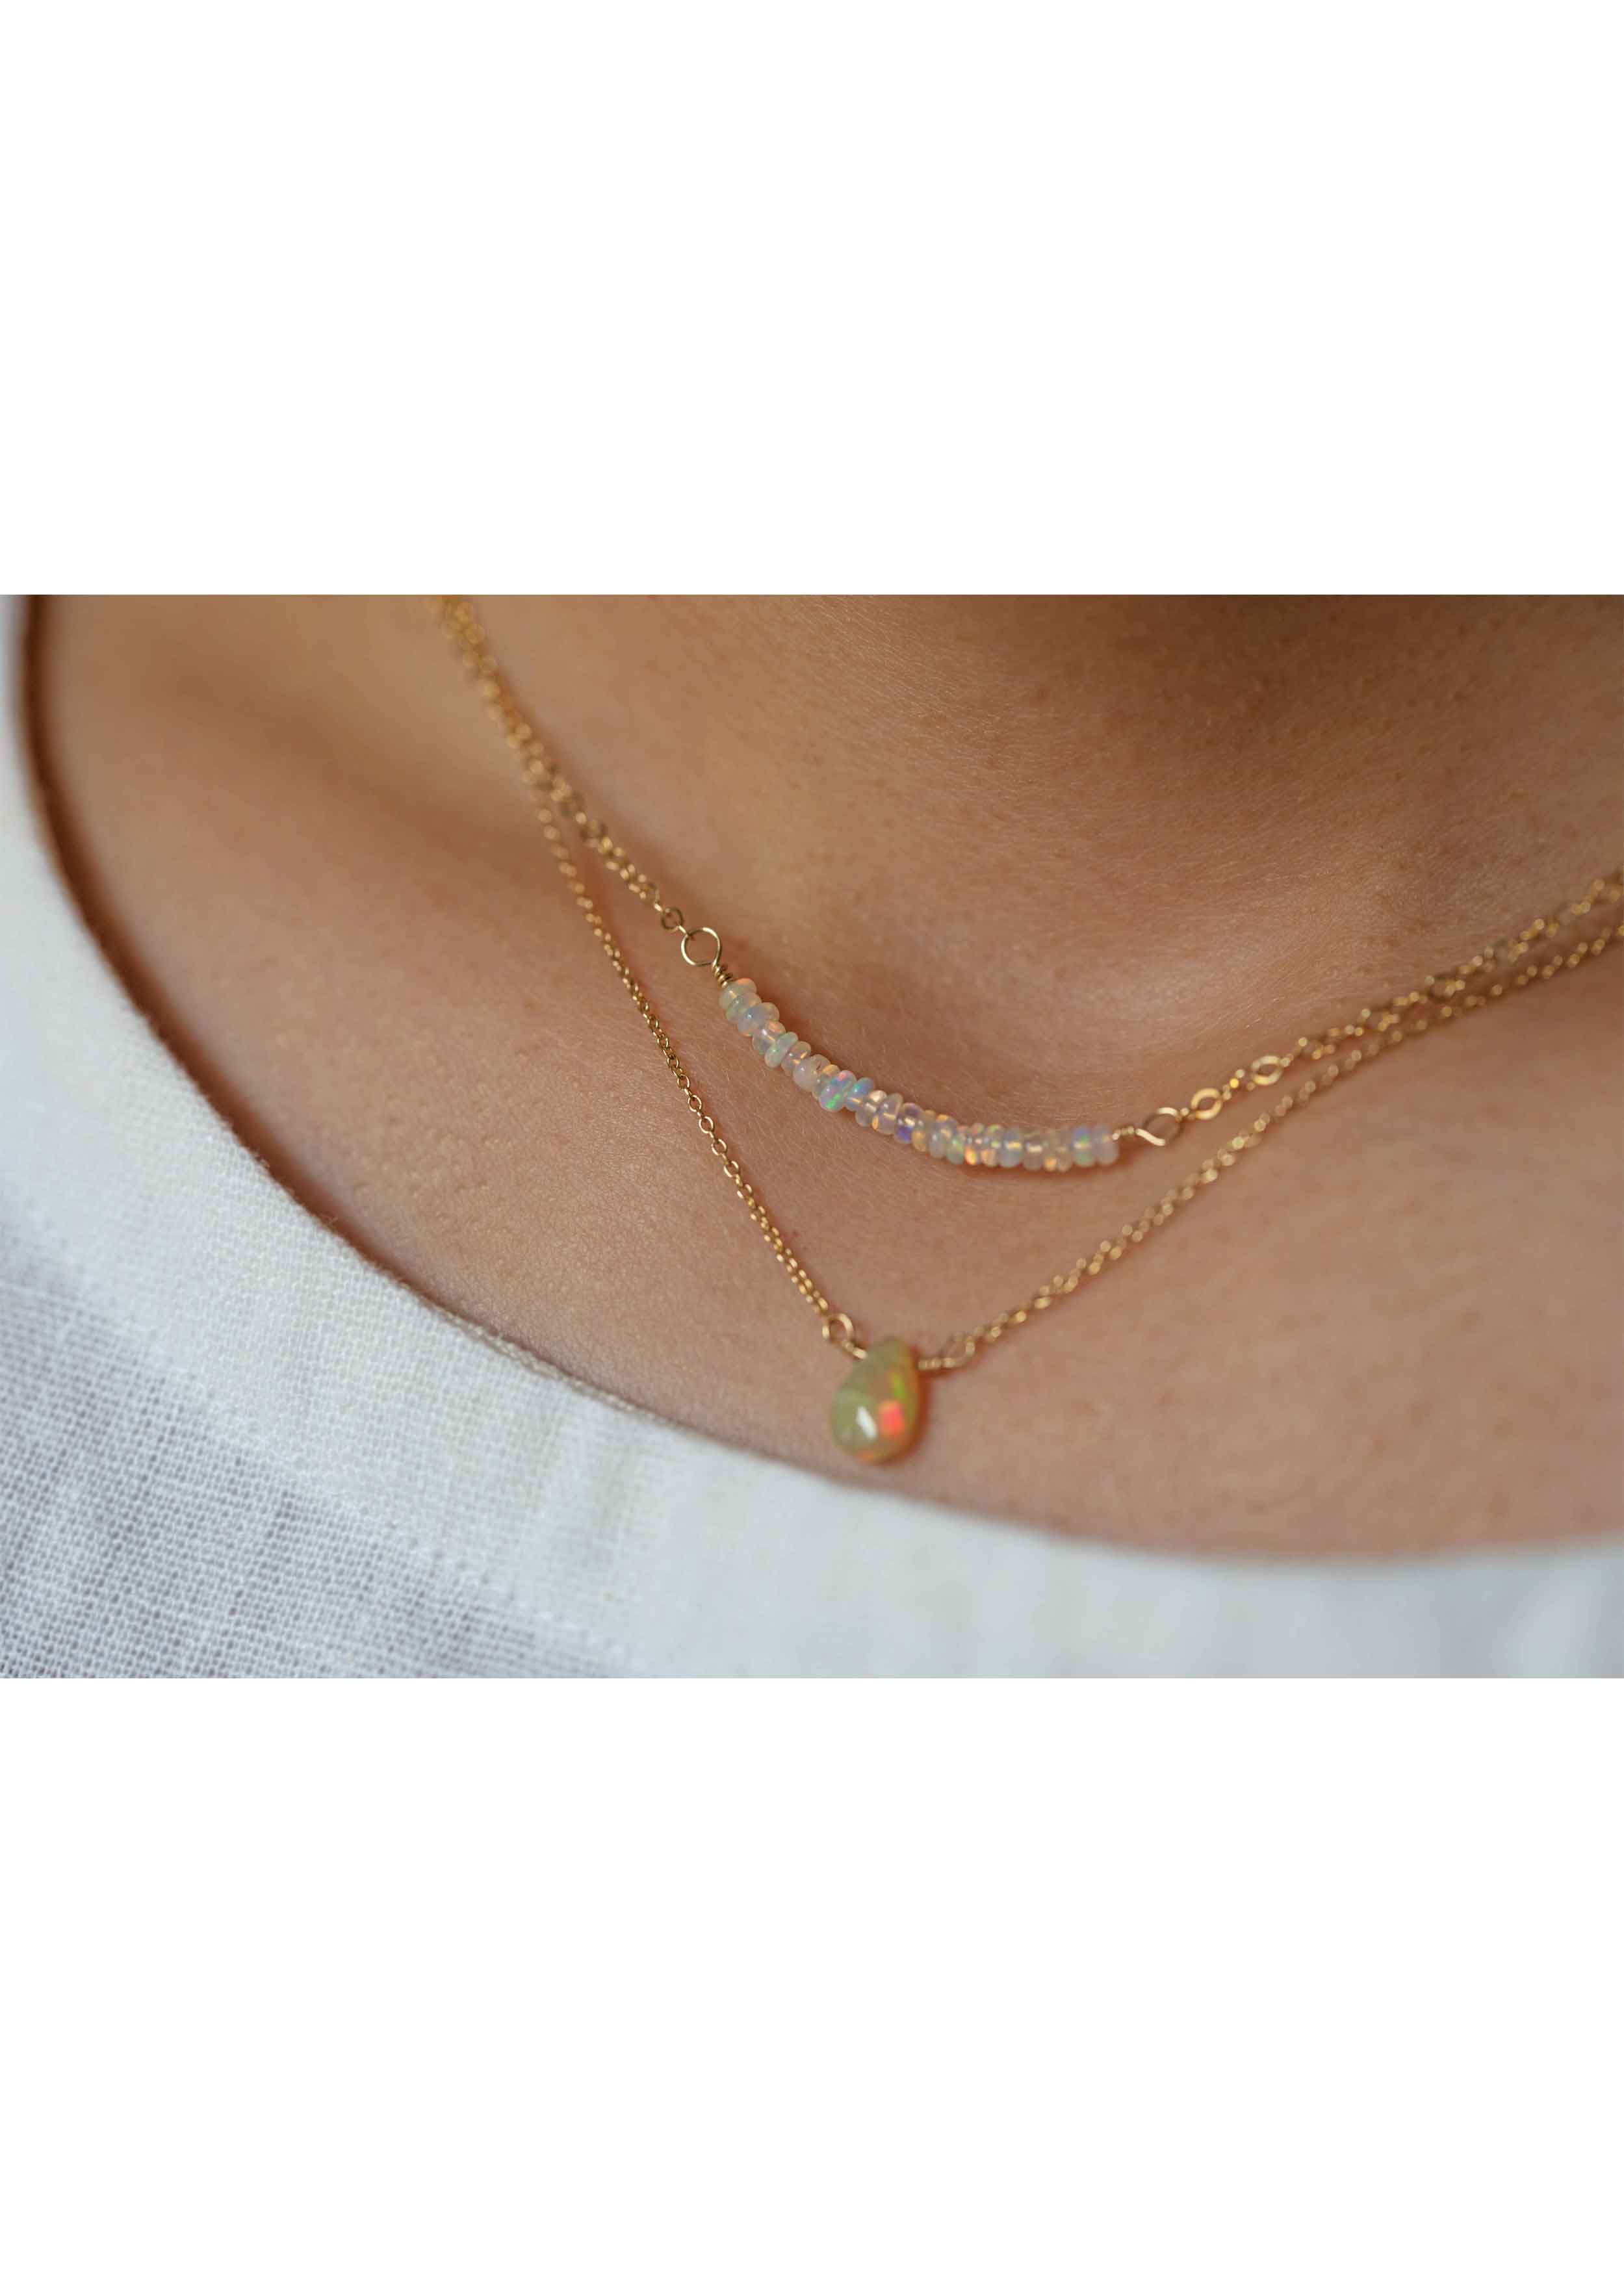 genuine opal necklace in gold filled curved bar necklace